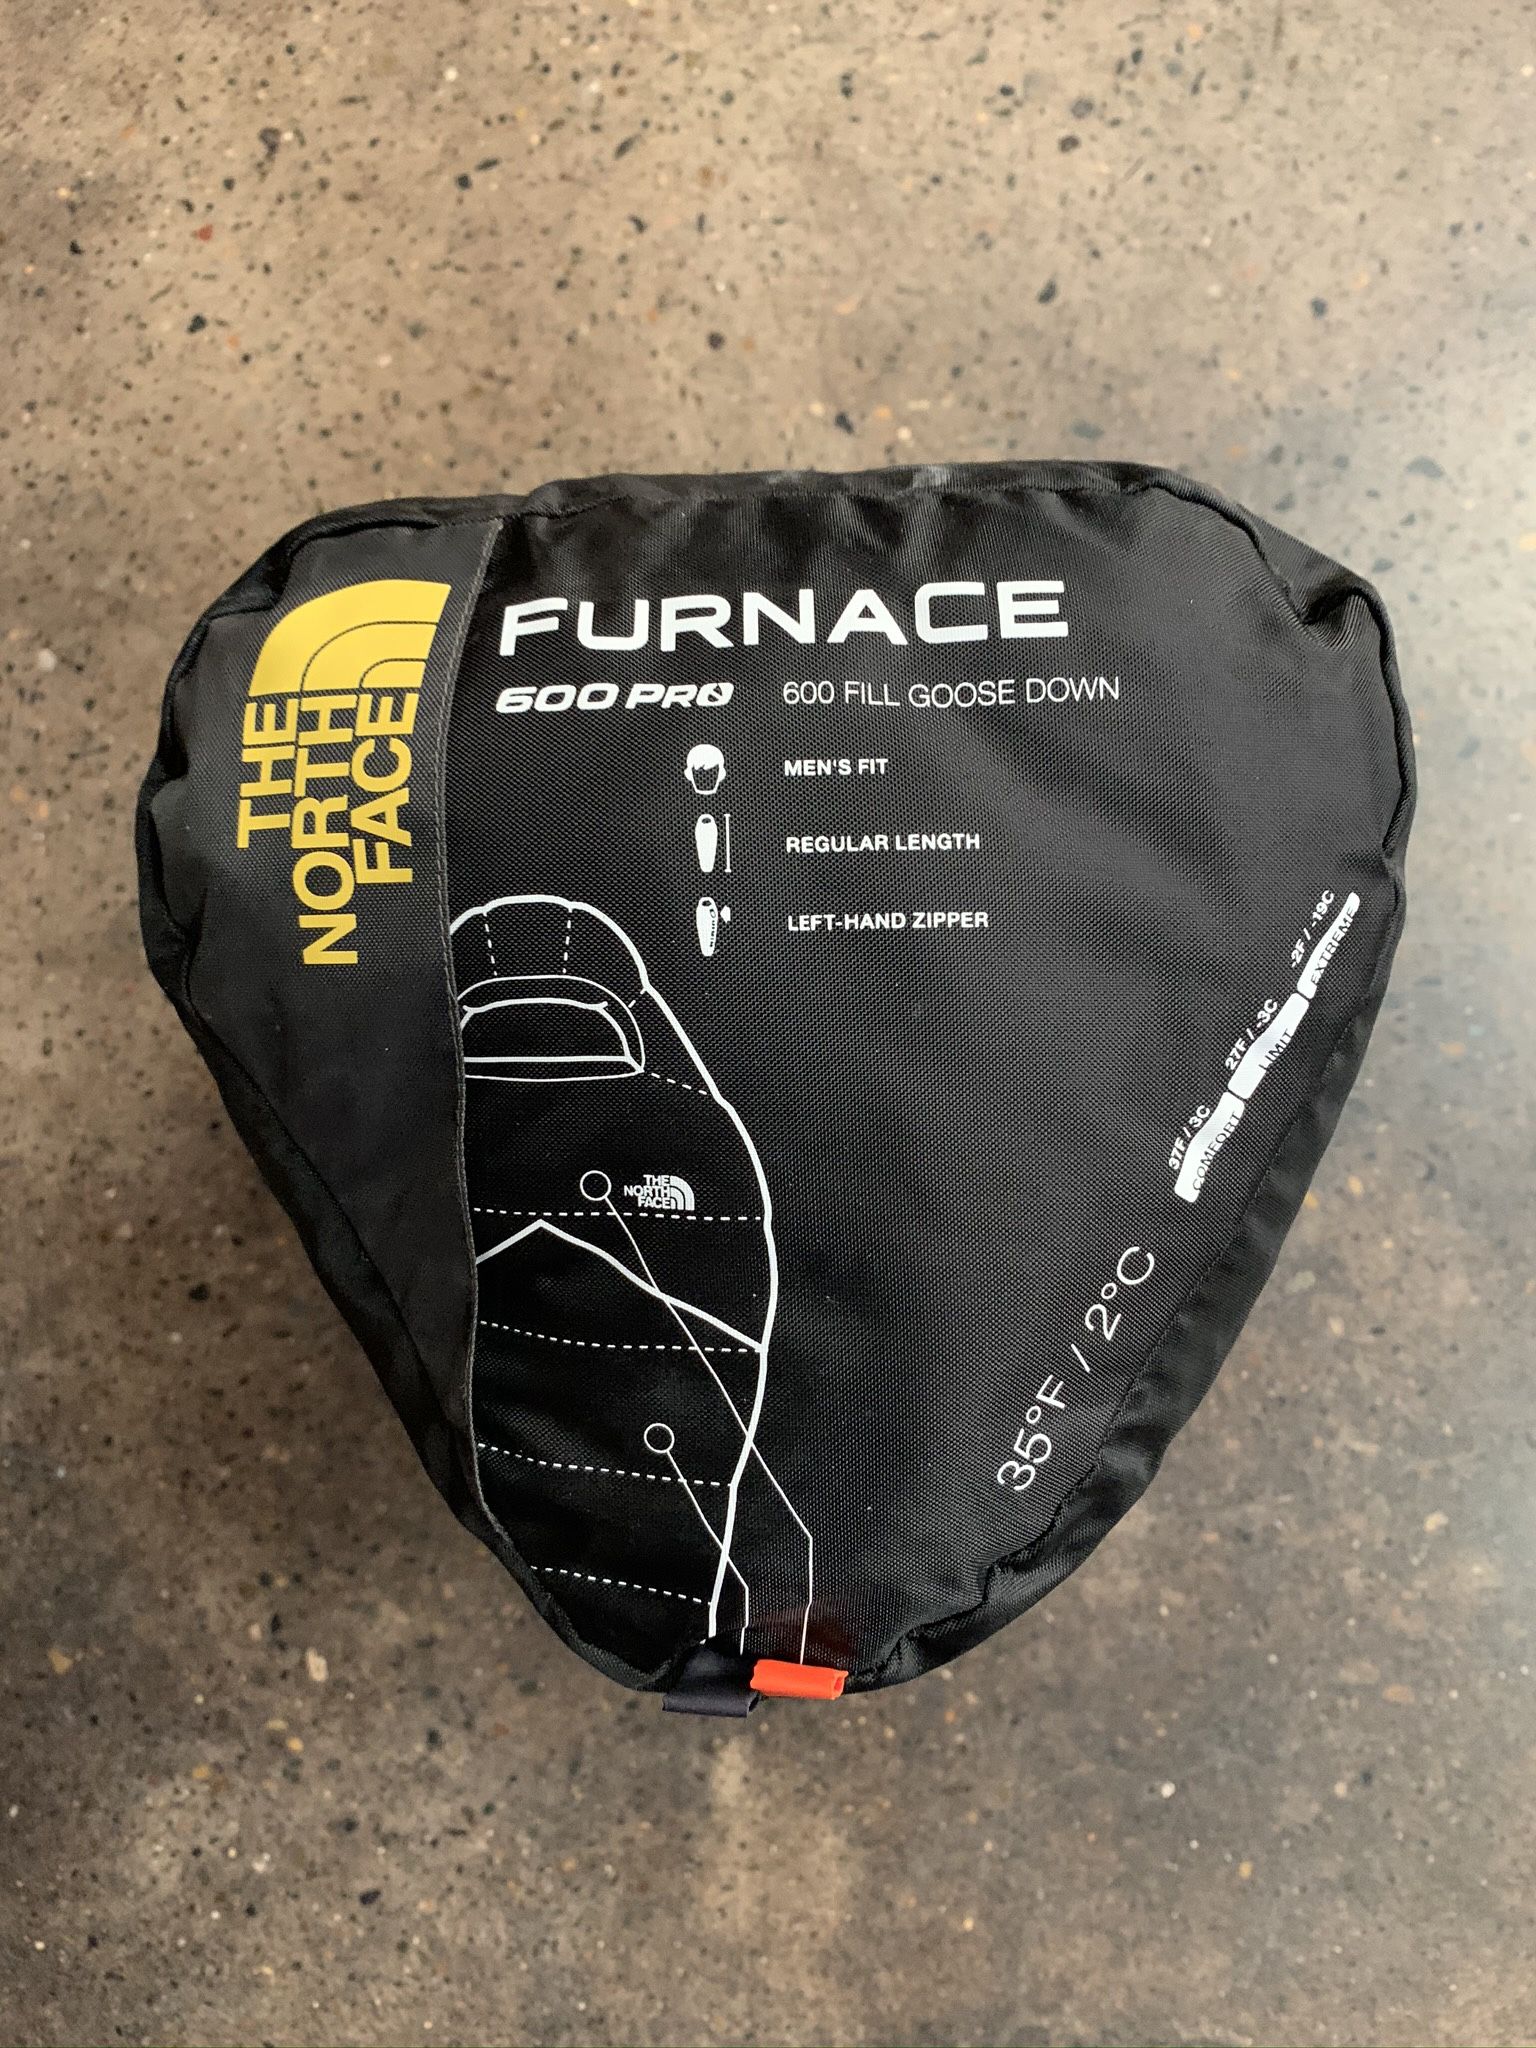 The North Face Furnace 35 Degree Sleeping Bag